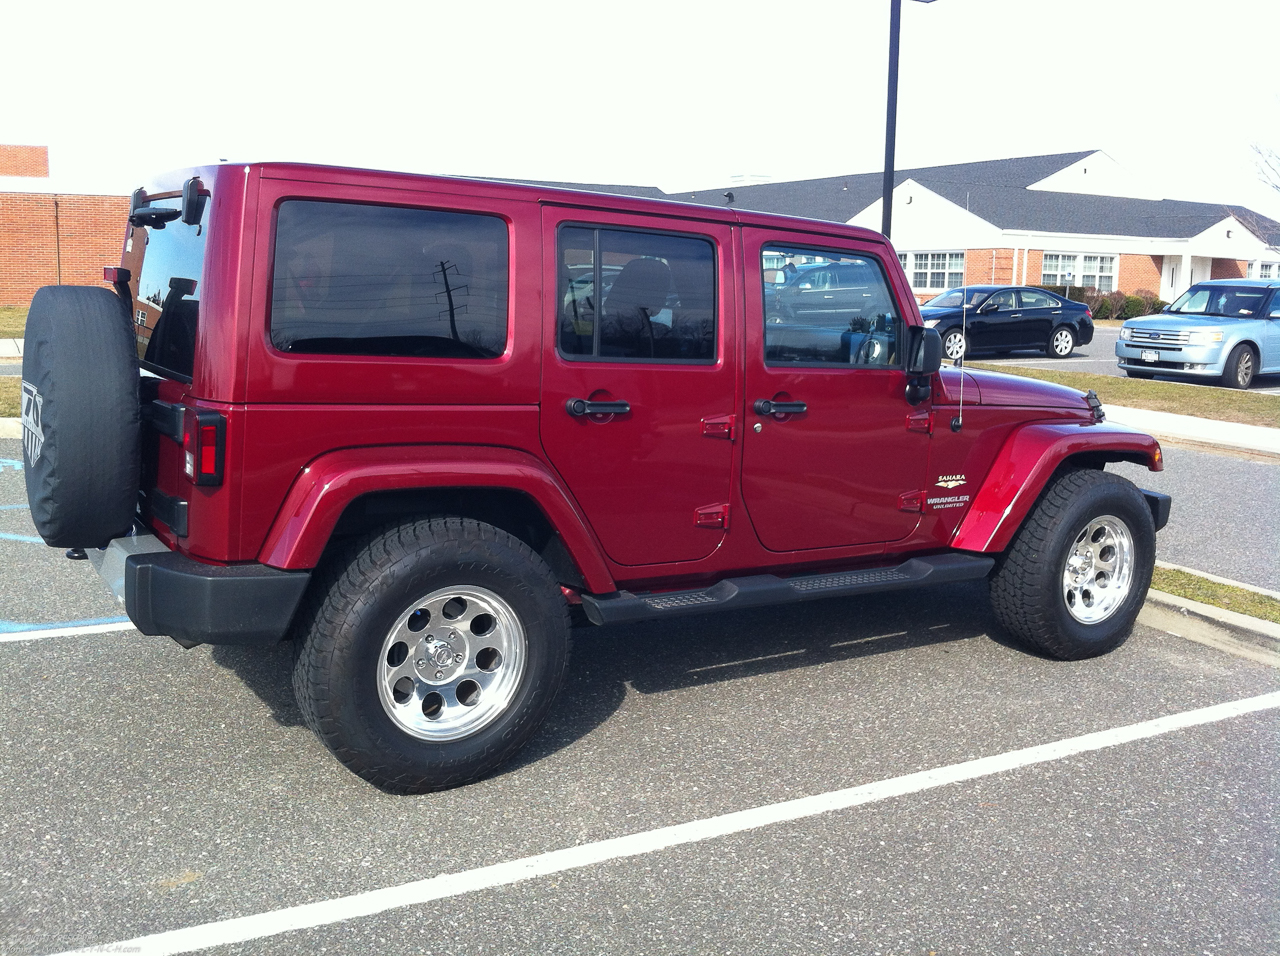 Thinking if new vewchicle to replace my 15 year old Jeep.  ~~  This looks nice?